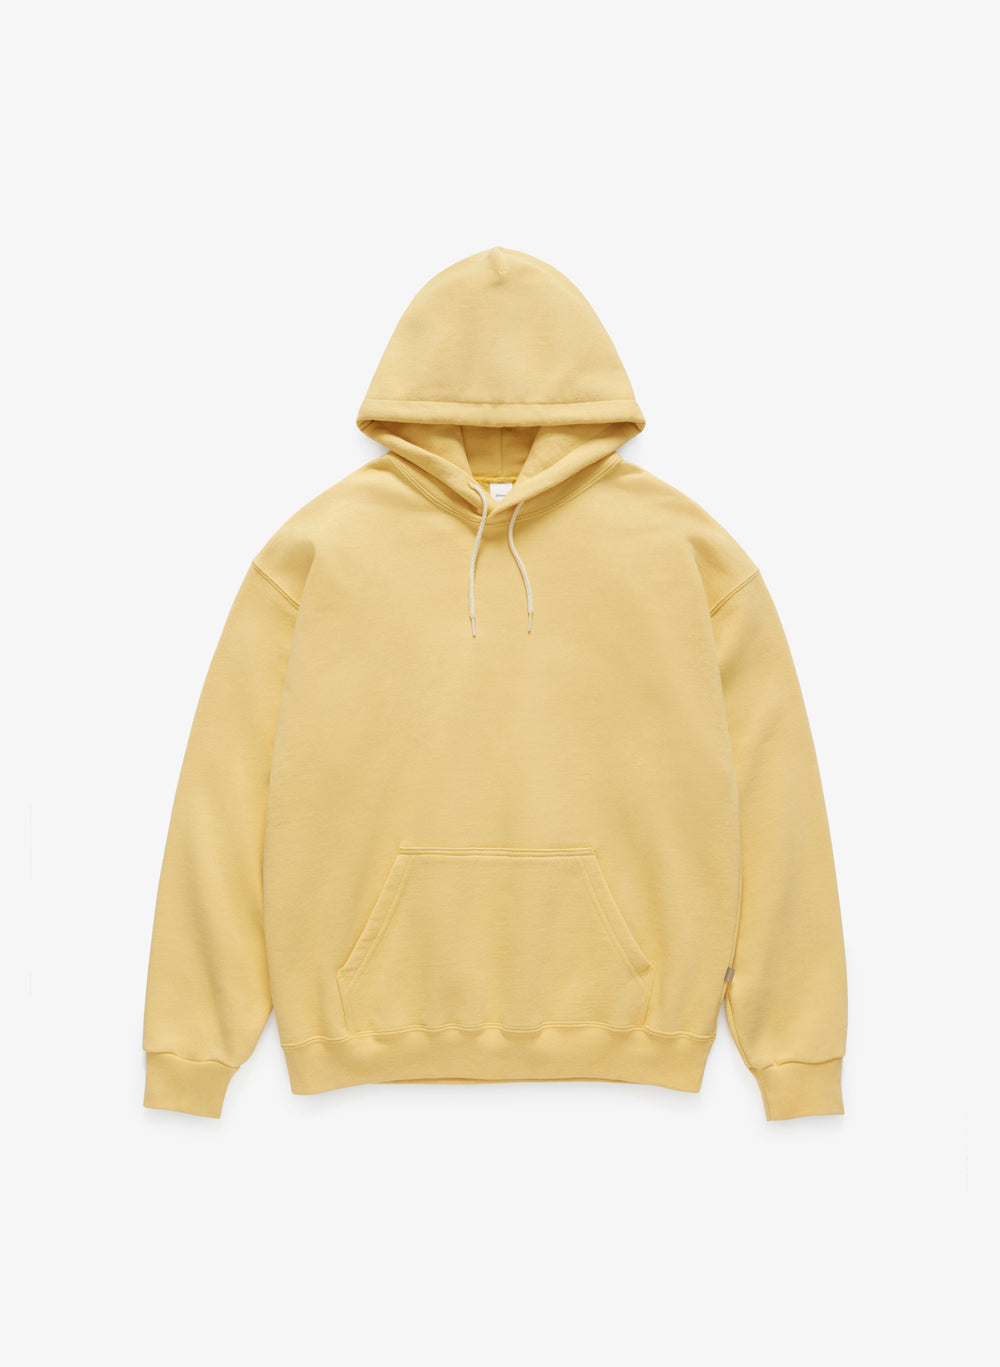 J2000 Hoodie - Yellow French Terry